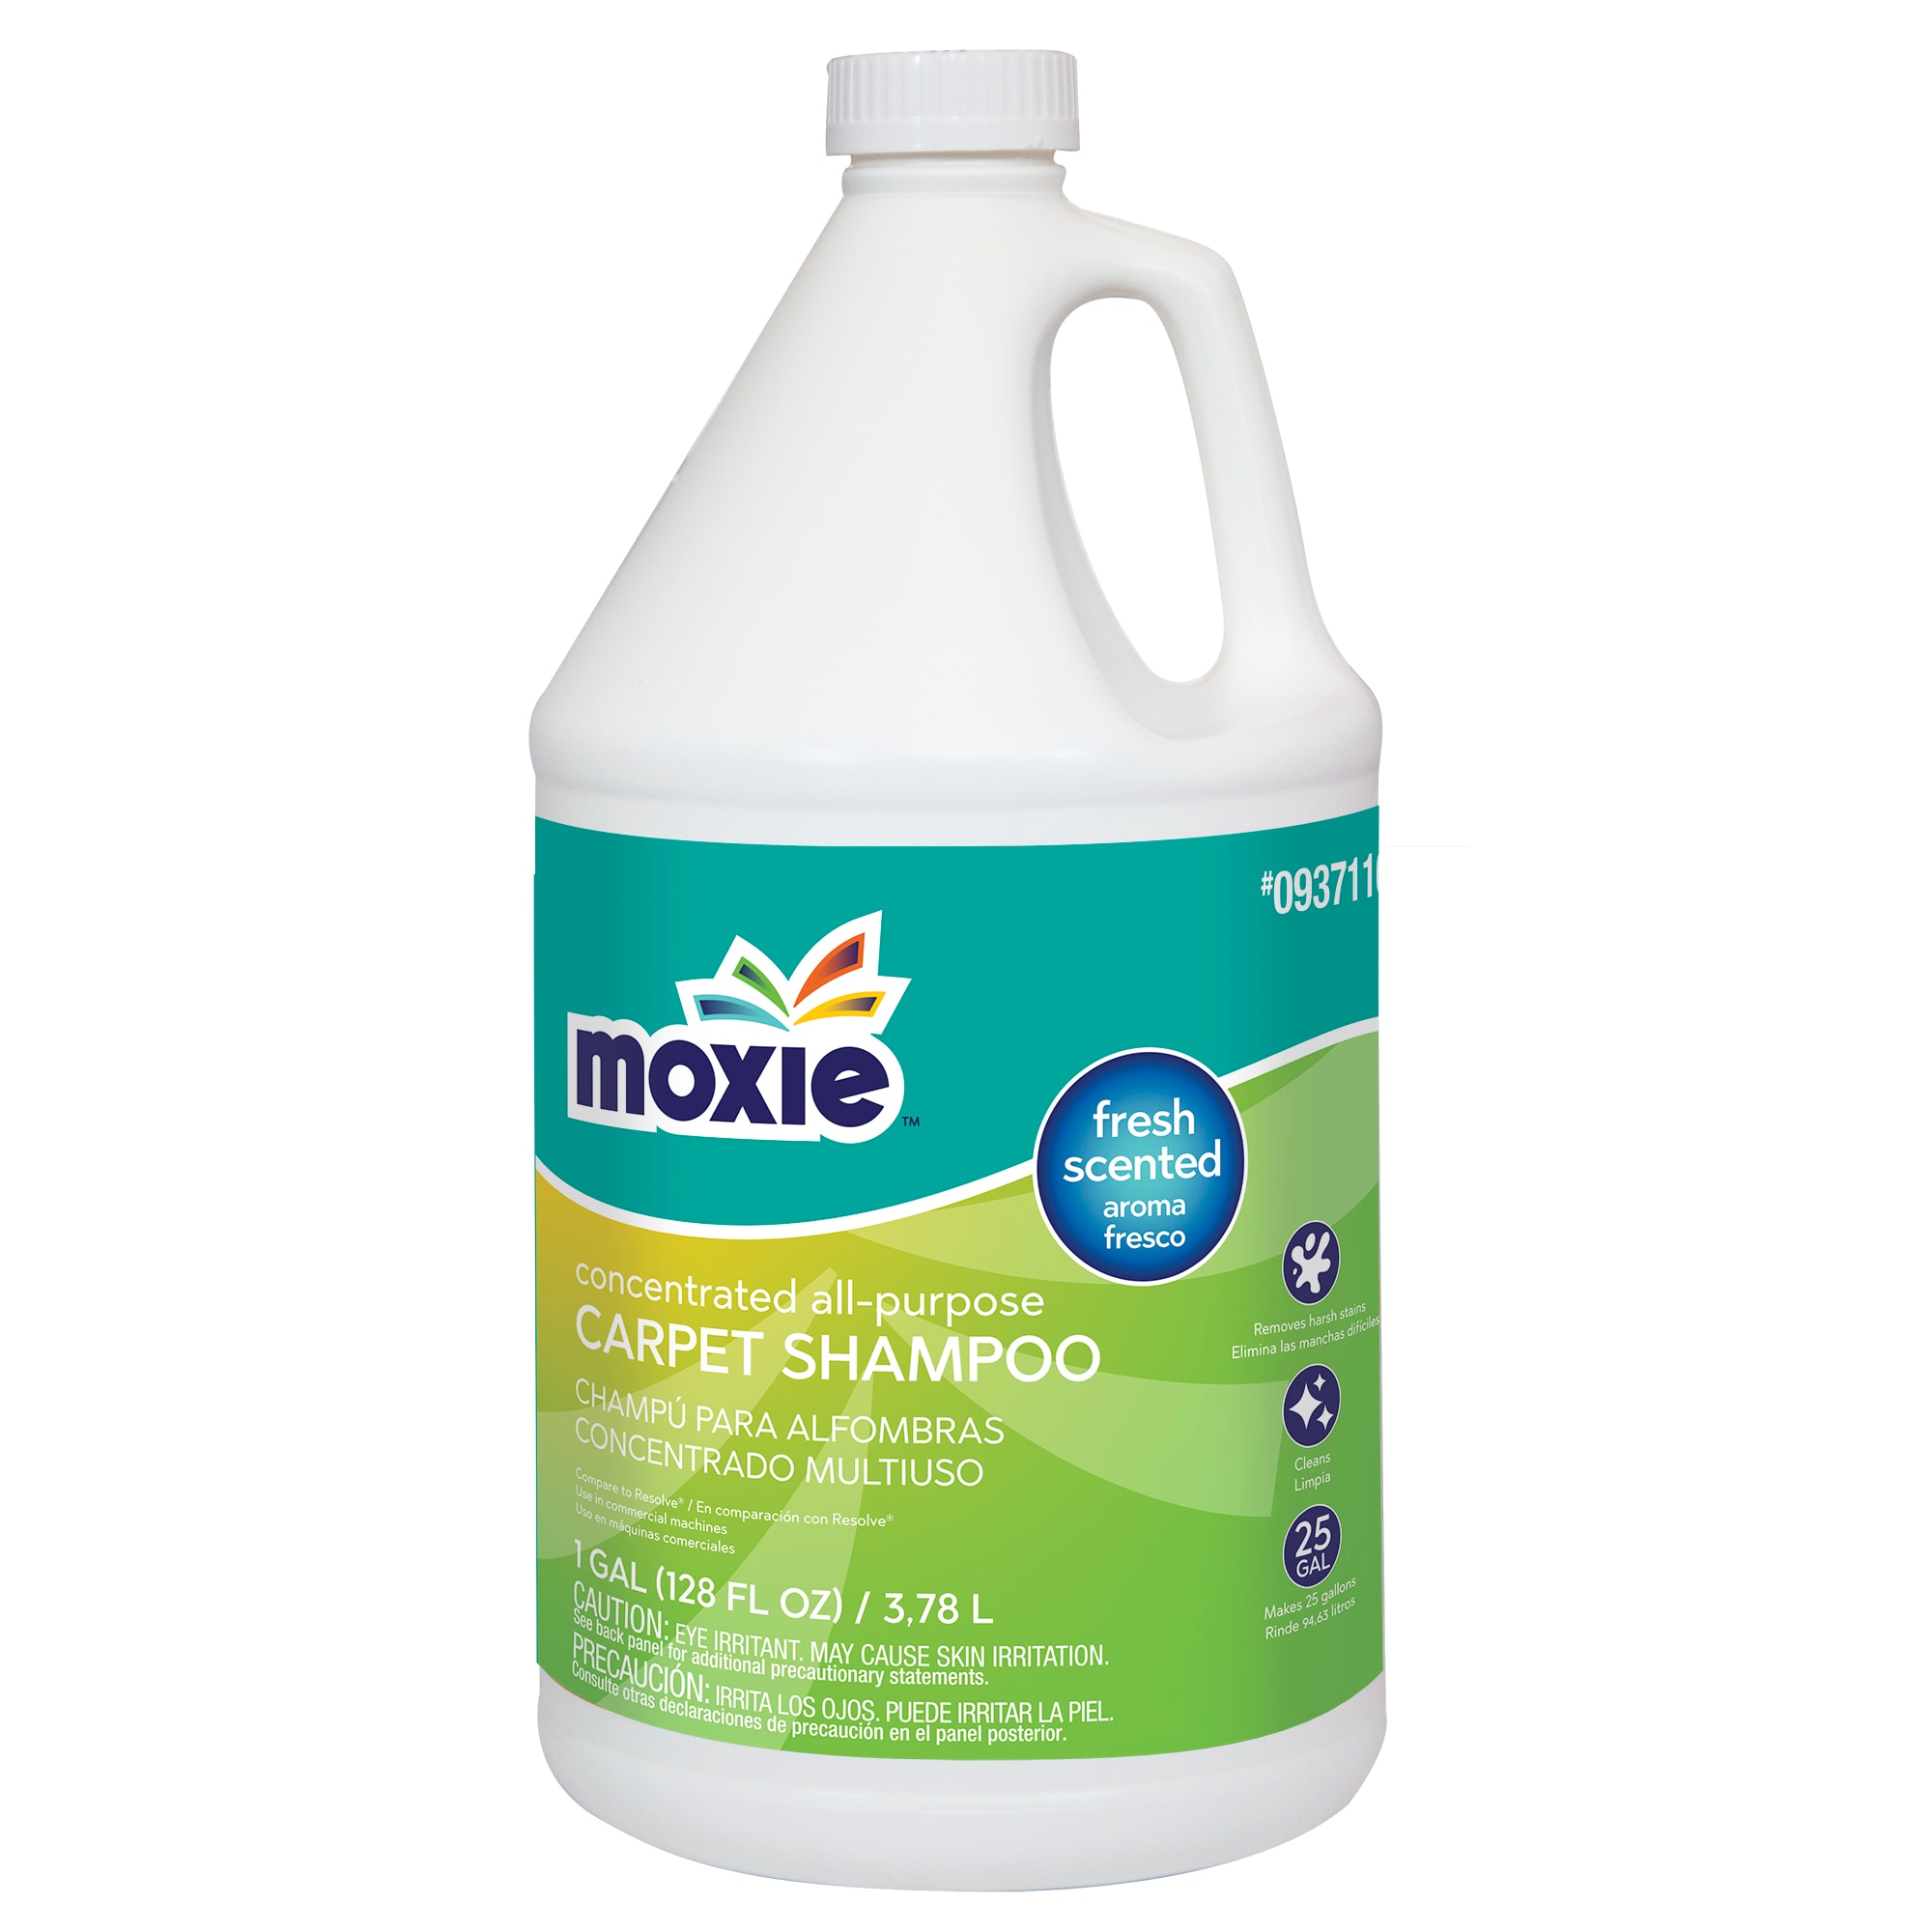 Rug Doctor Professional Cleaner, Multi-Purpose, Fabric + Upholstery, Fresh Spring - 24 fl oz